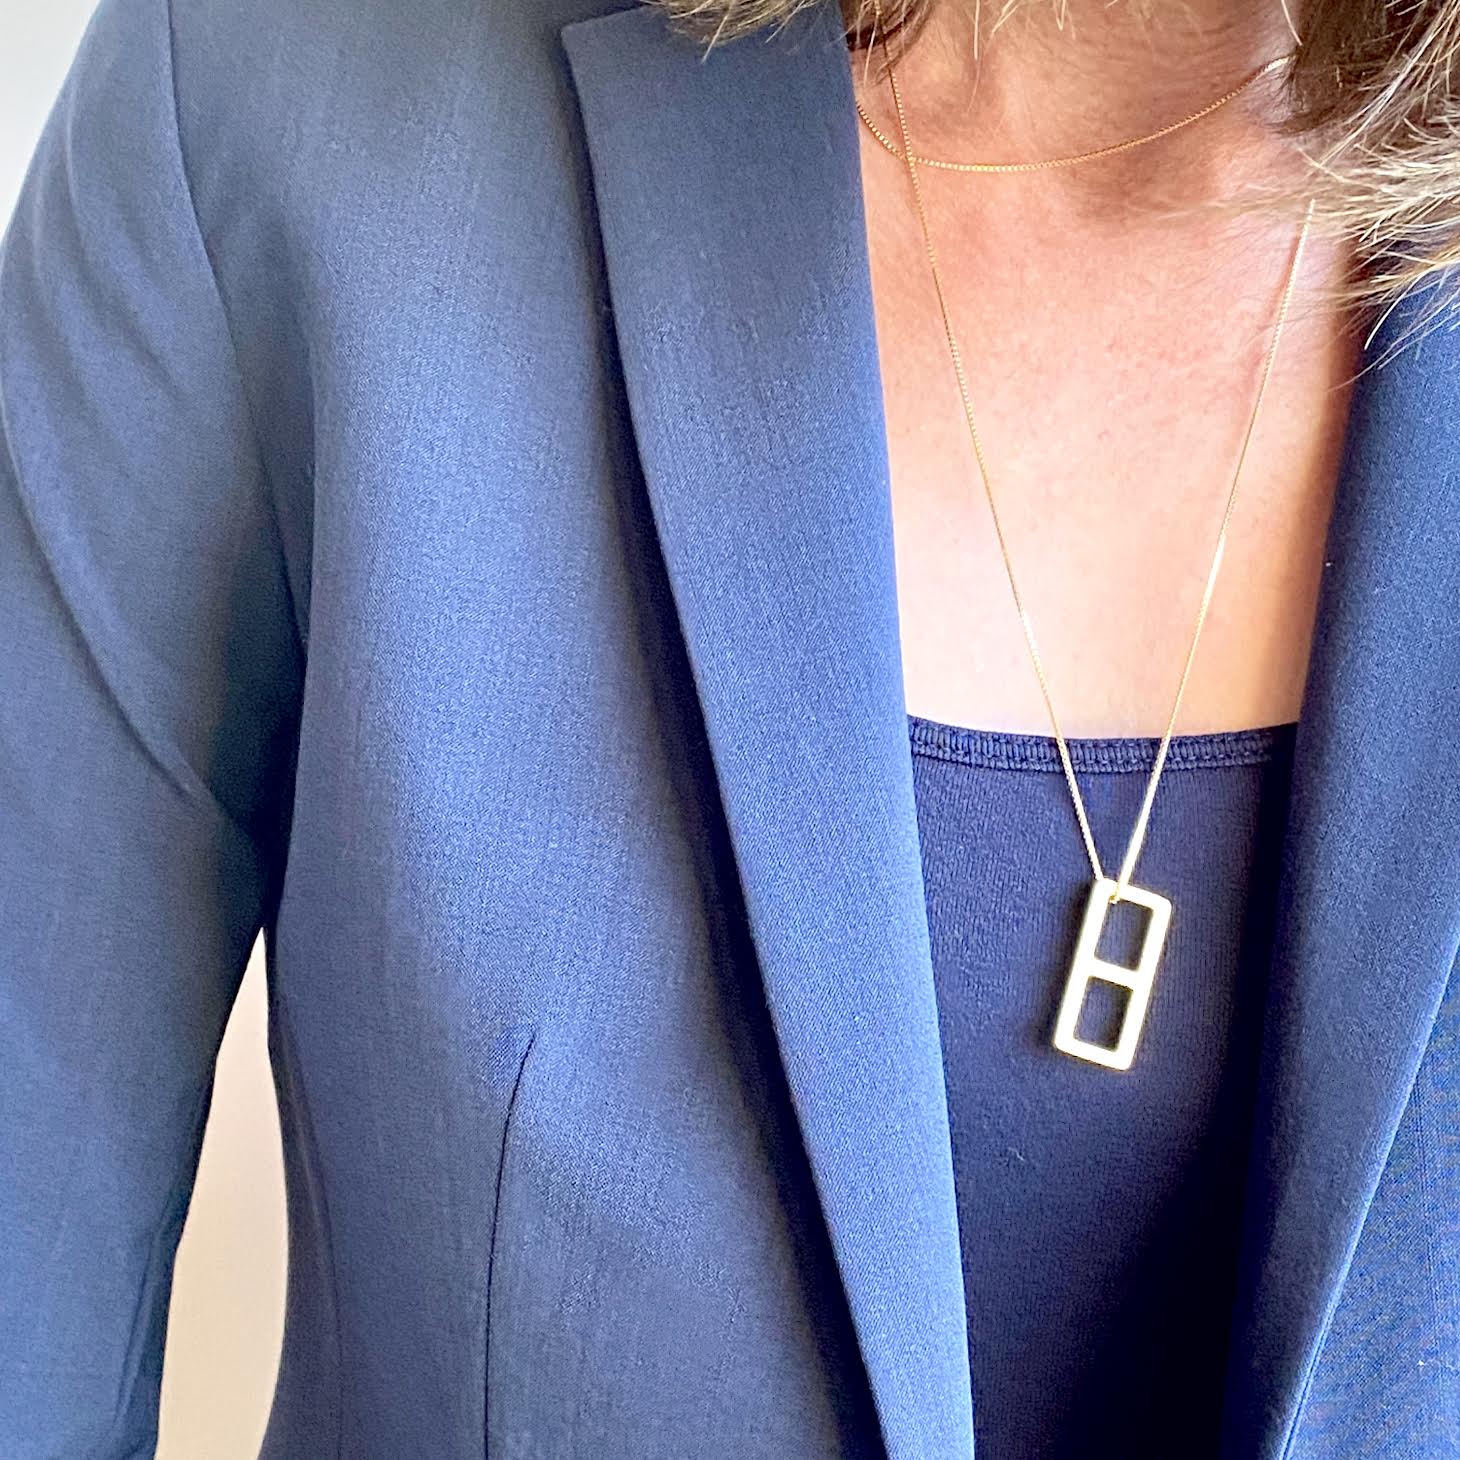 This meticulously designed with a geometrical flavor, this brushed rose gold pendant necklace is perfect worn alone or paired with a WristBend stacking bracelet. Made by WristBend